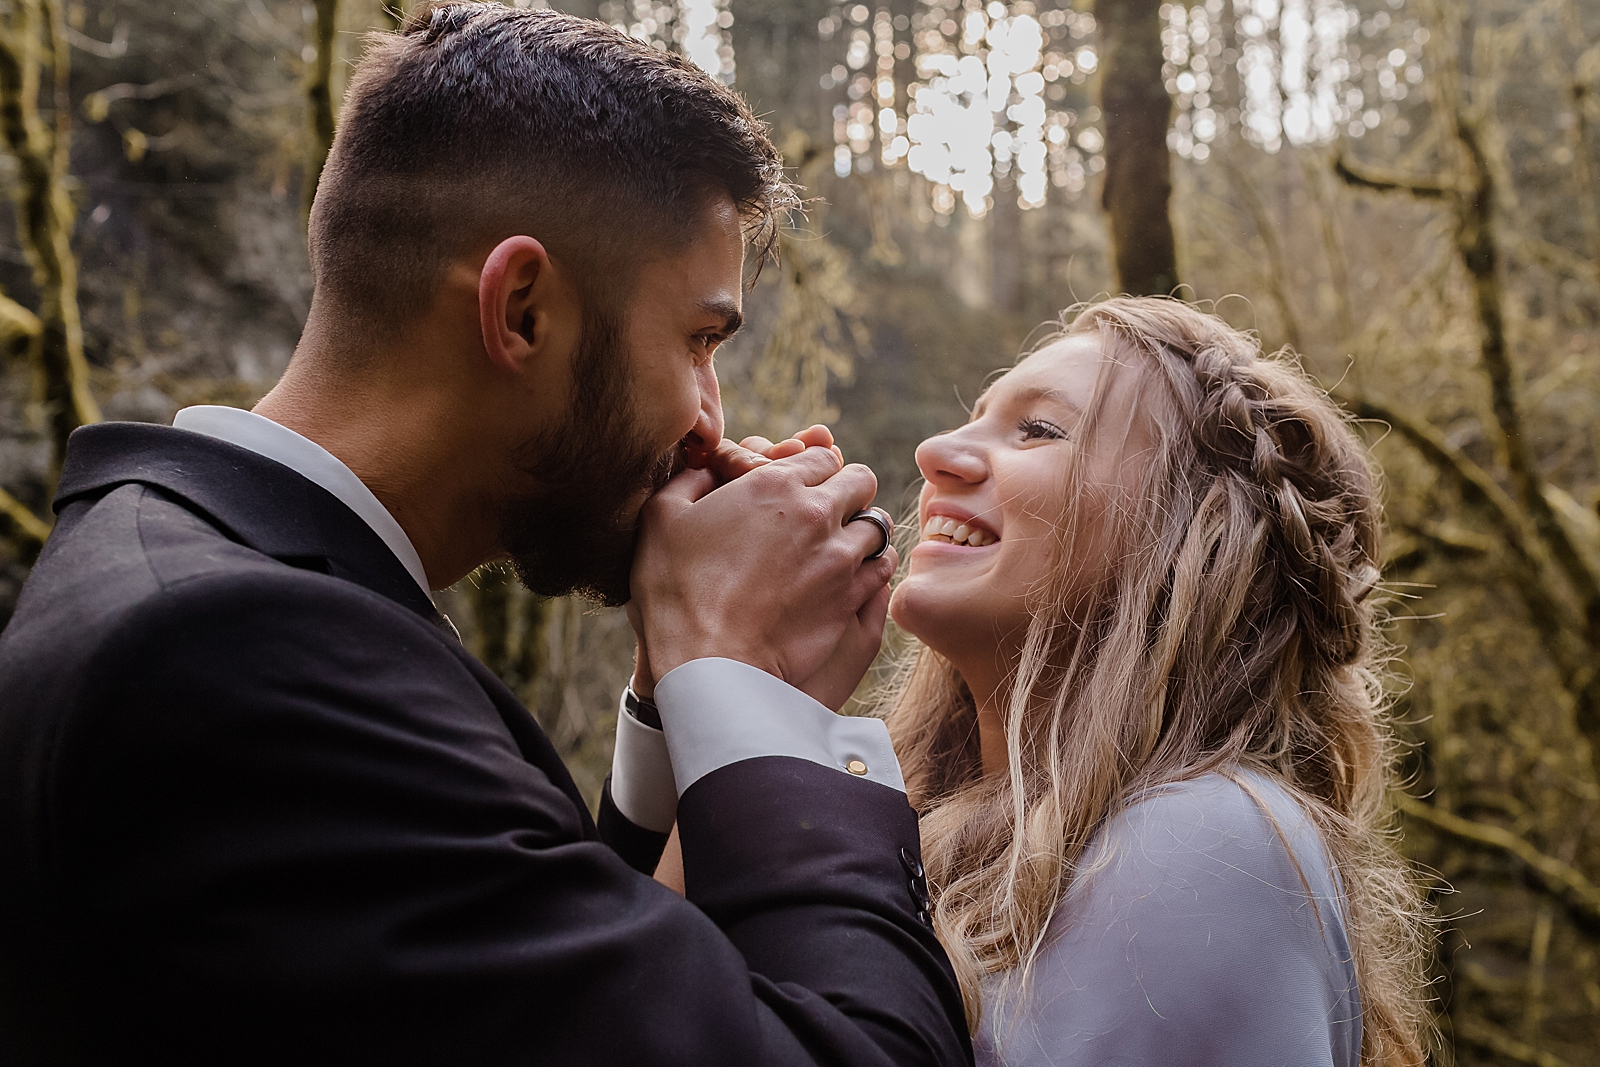 Man kissing woman's hand in the forest Silver Falls State Park Oregon Adventure Photography captured by Simply Wandering Photography 